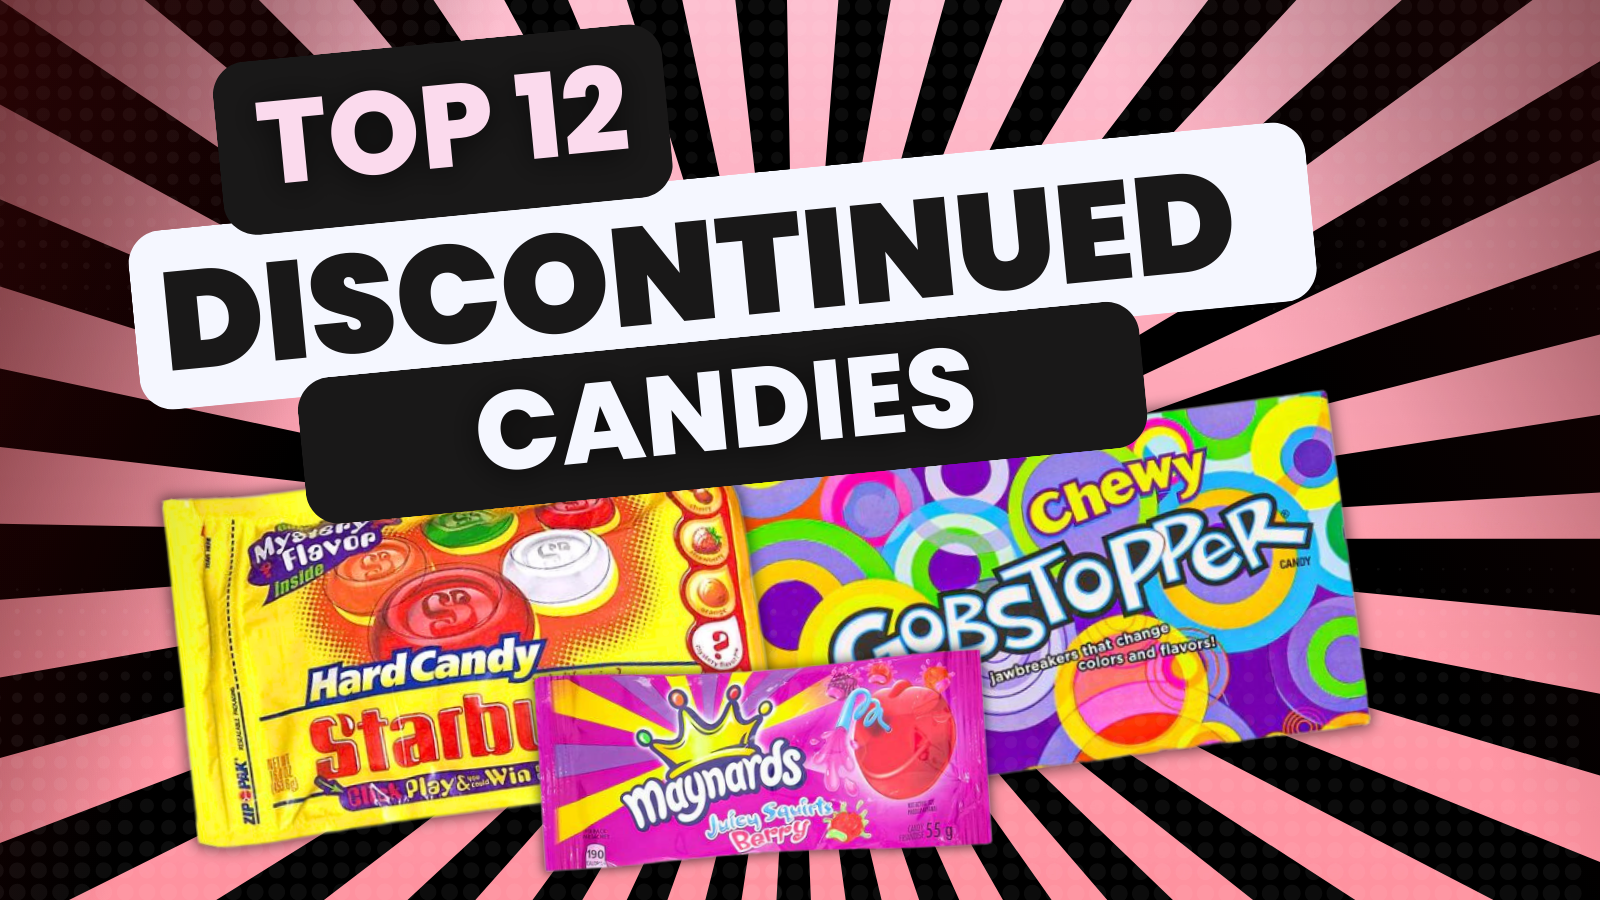 90s Candy Discontinued - 90s Discontinued Candy - Nostalgic Candy - Retro Candy - Discontinued Candy